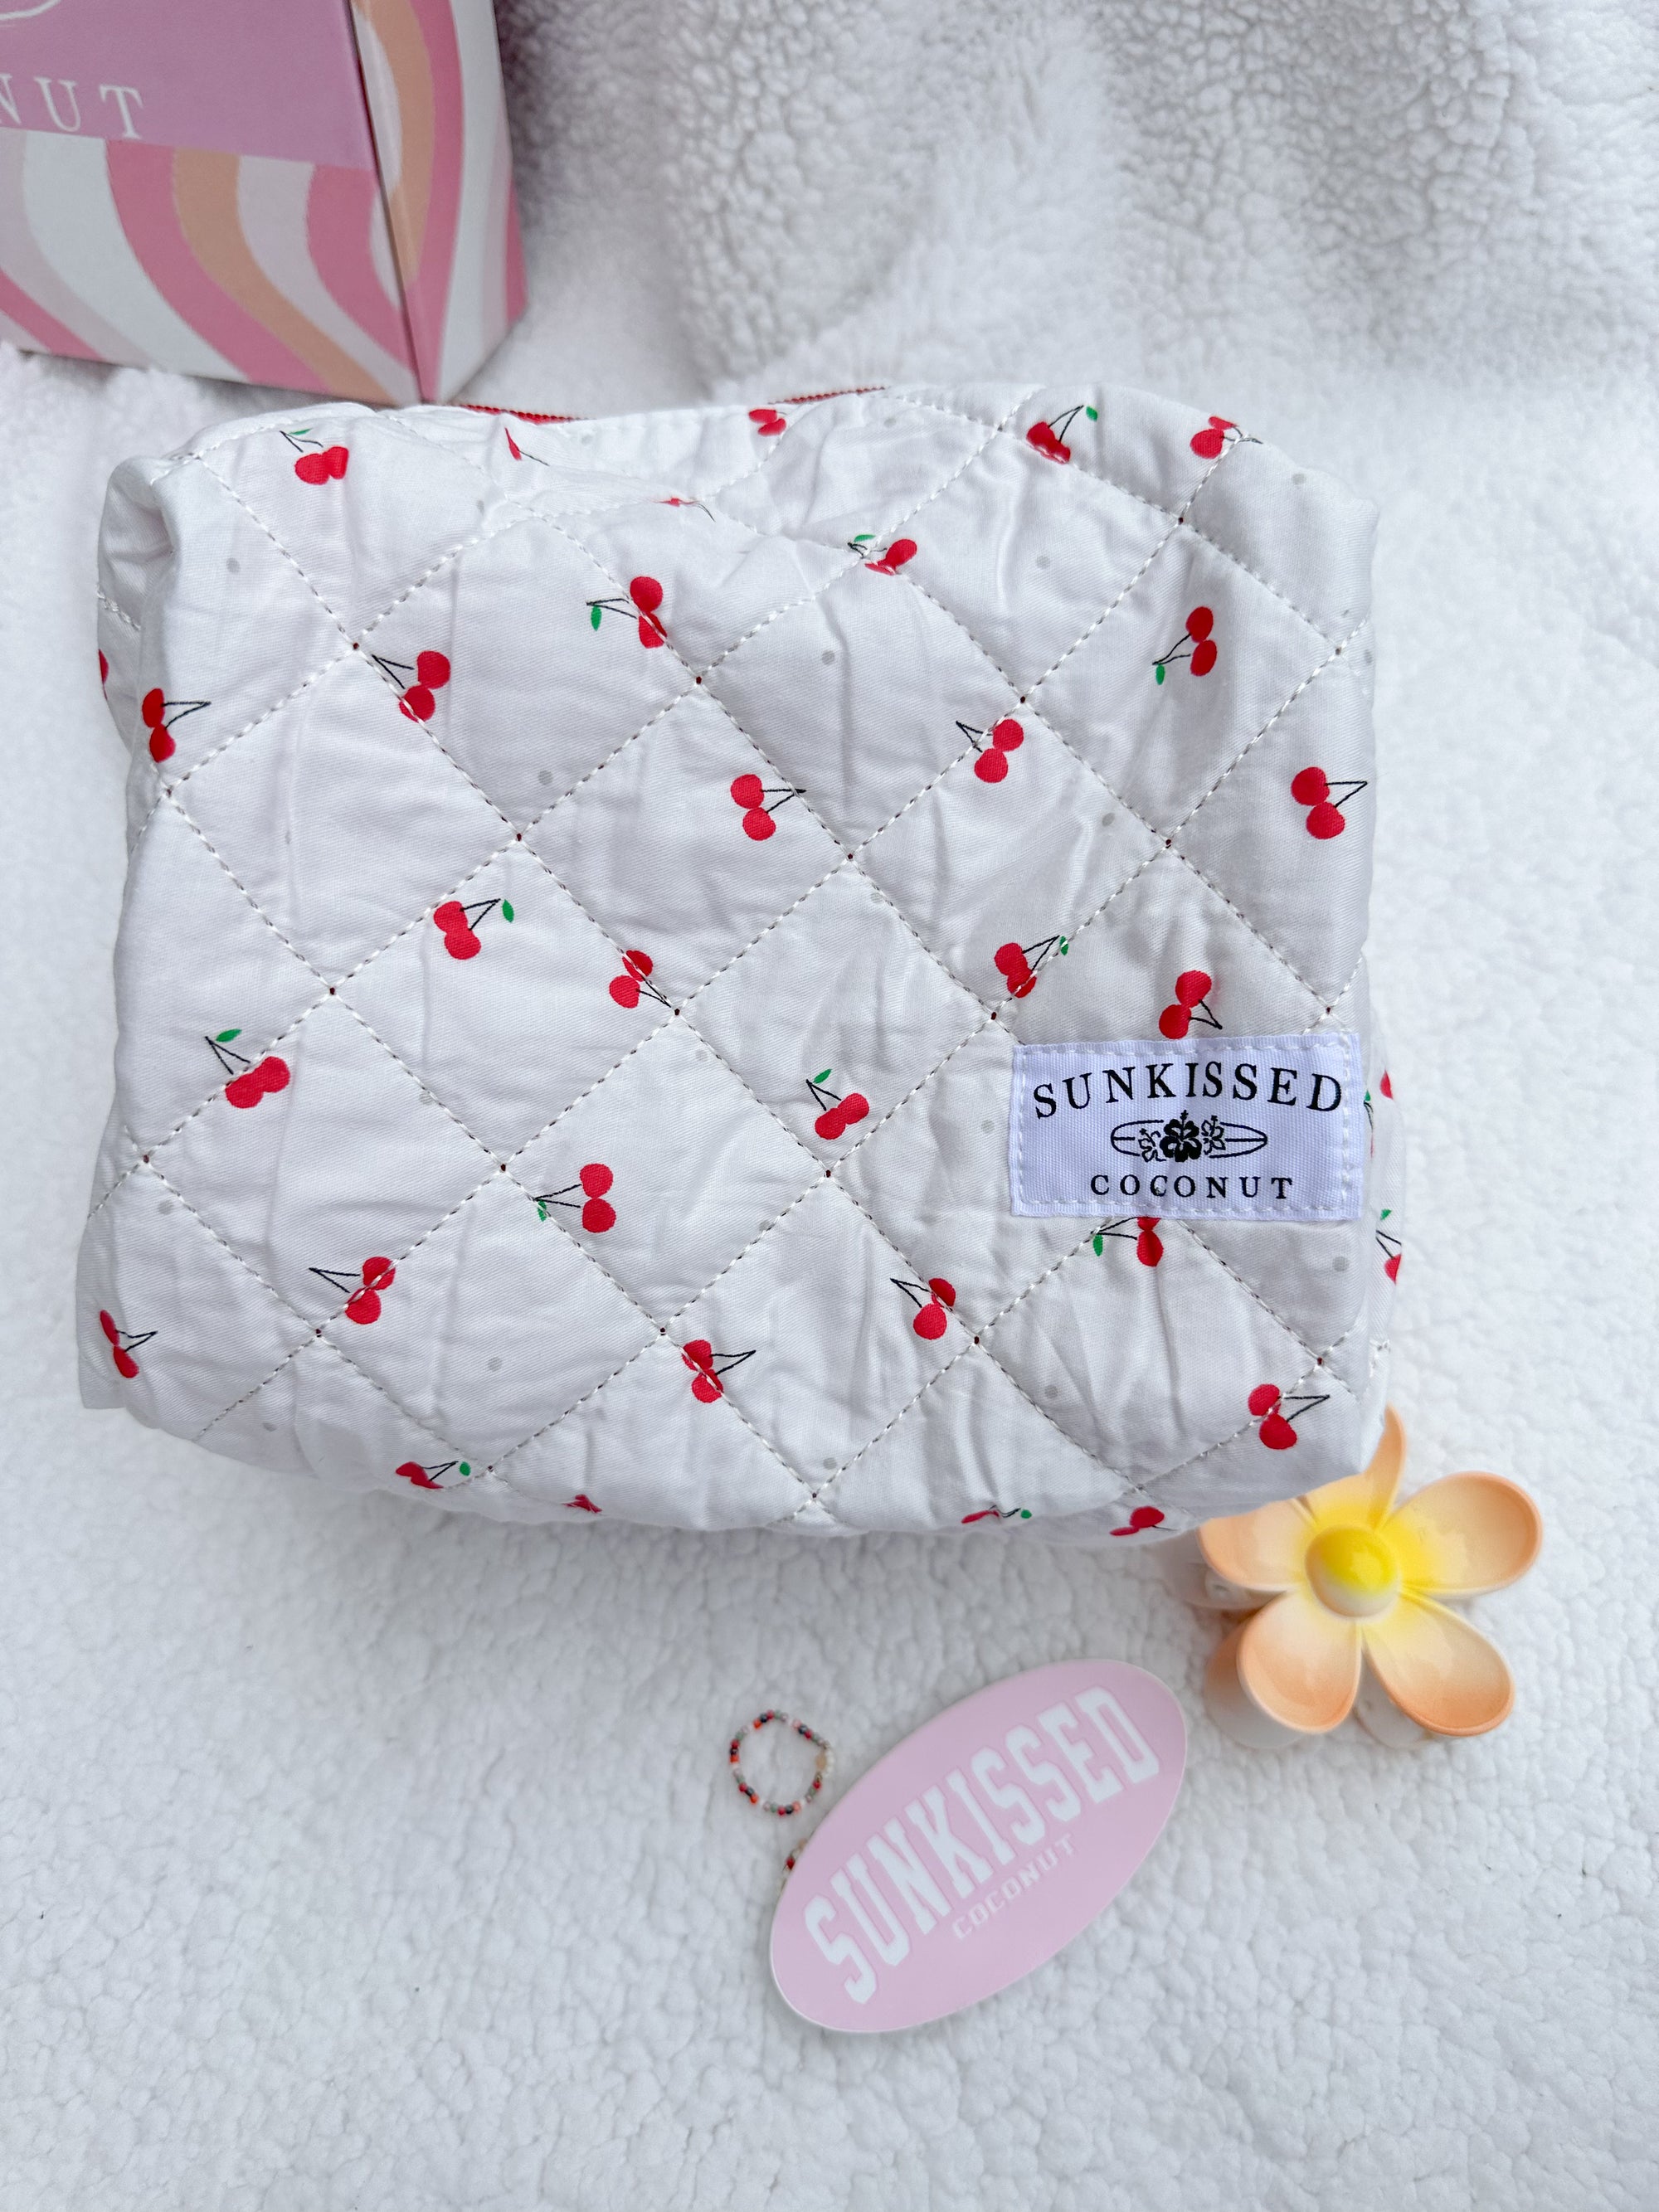 Cherry Quilted Handmade Makeup Bag